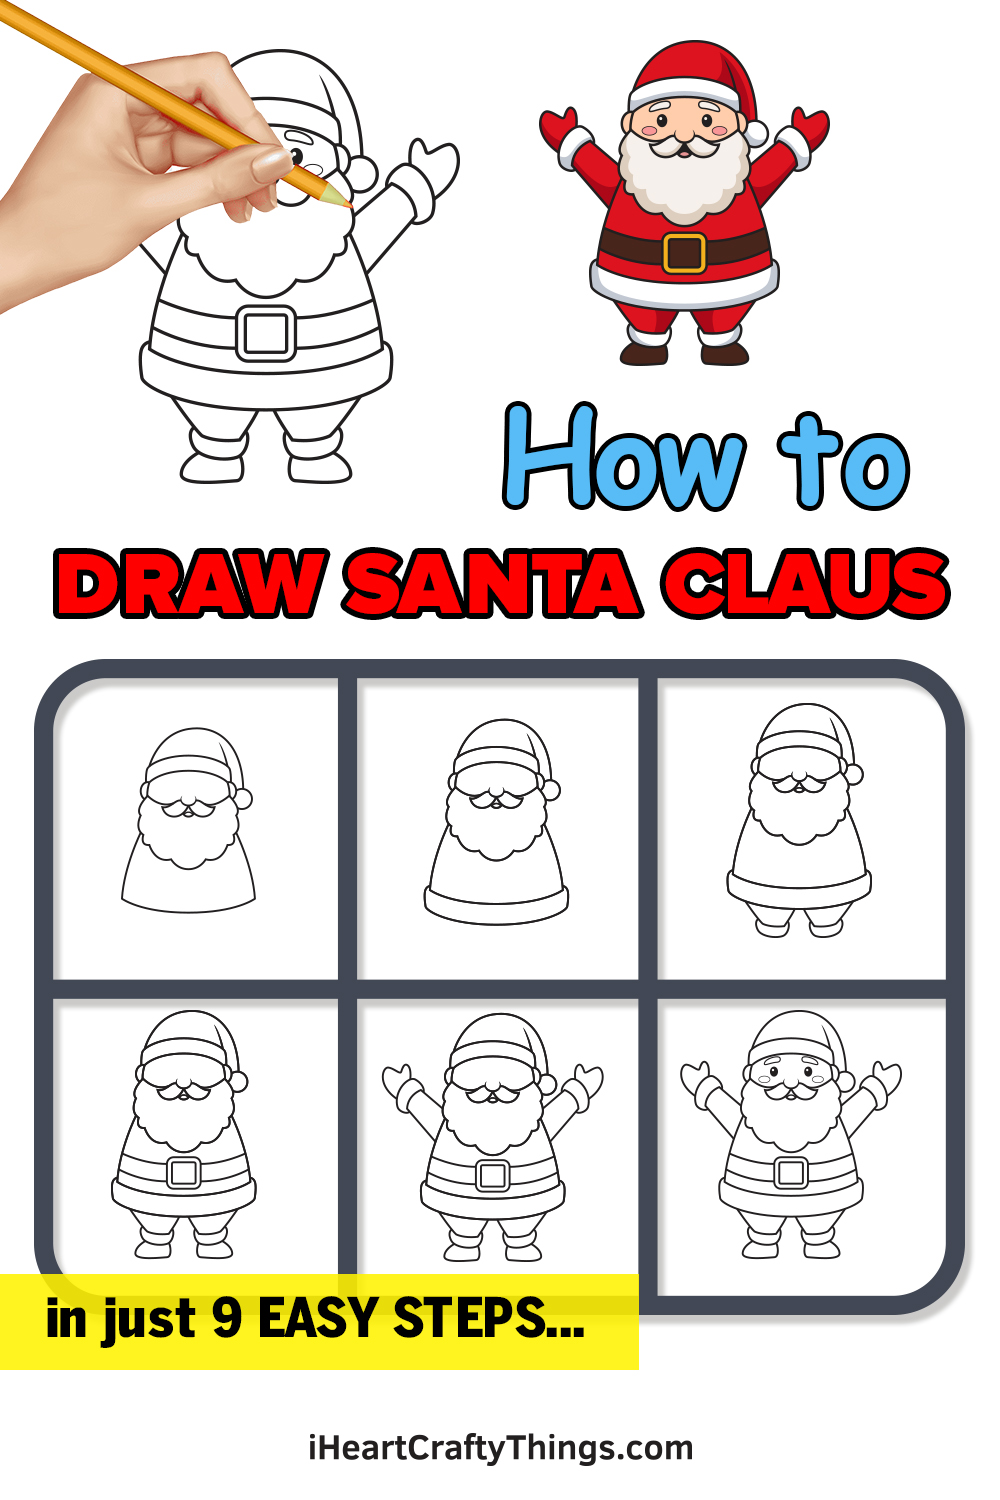 Christmas Tree Drawing with Santa claus gifts | Easy Drawing of Xmas tree